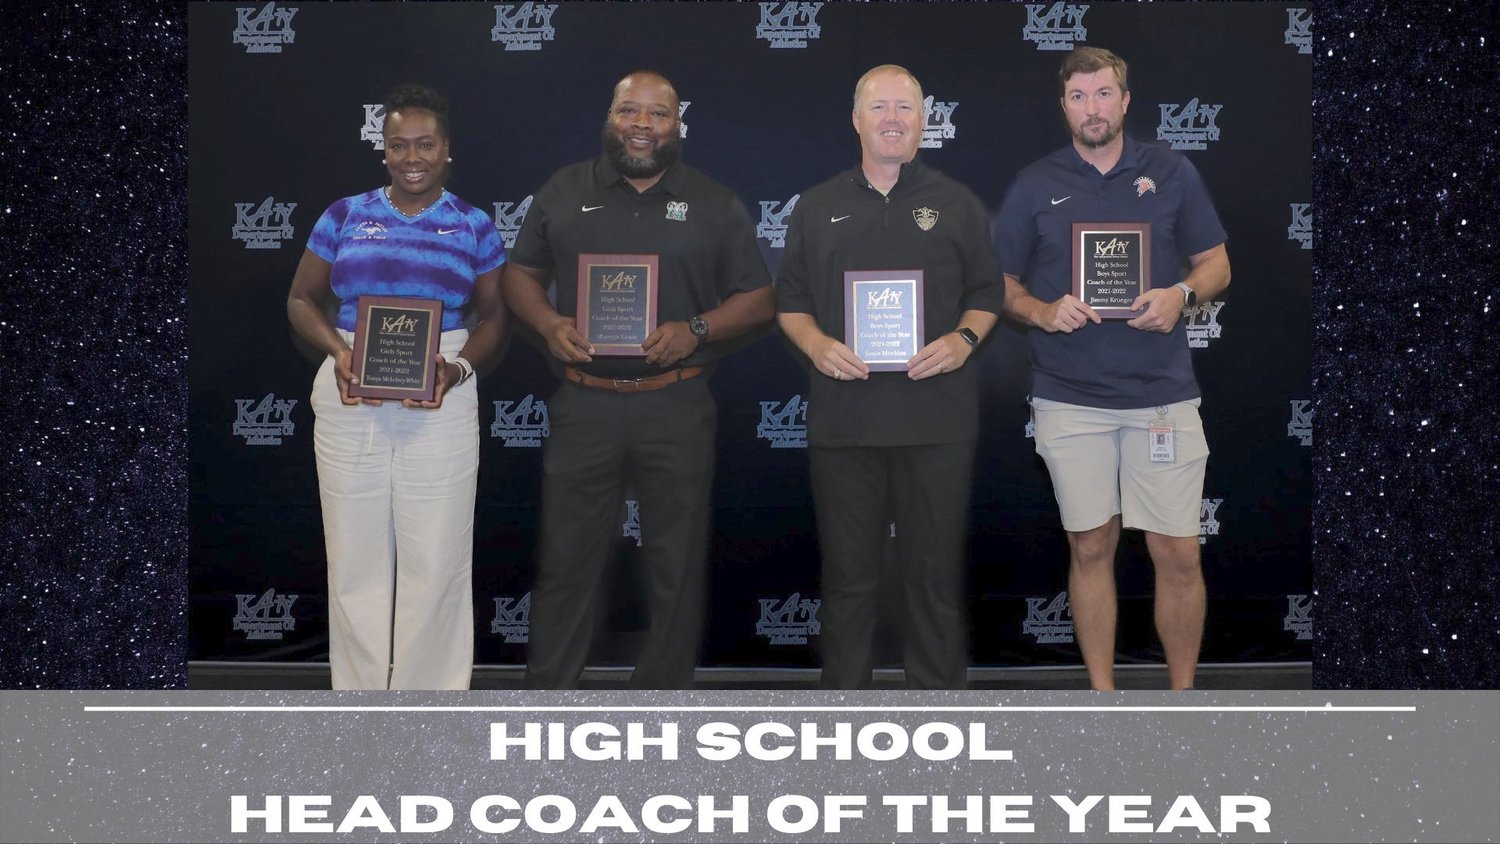 Seven Lakes Jimmy Kreuger, Jordan’s Jason Meekins, Taylor’s Tonya McKelvey-White and Mayde Creek’s Mareon Lewis were named the Katy ISD high school head coaches of the year.